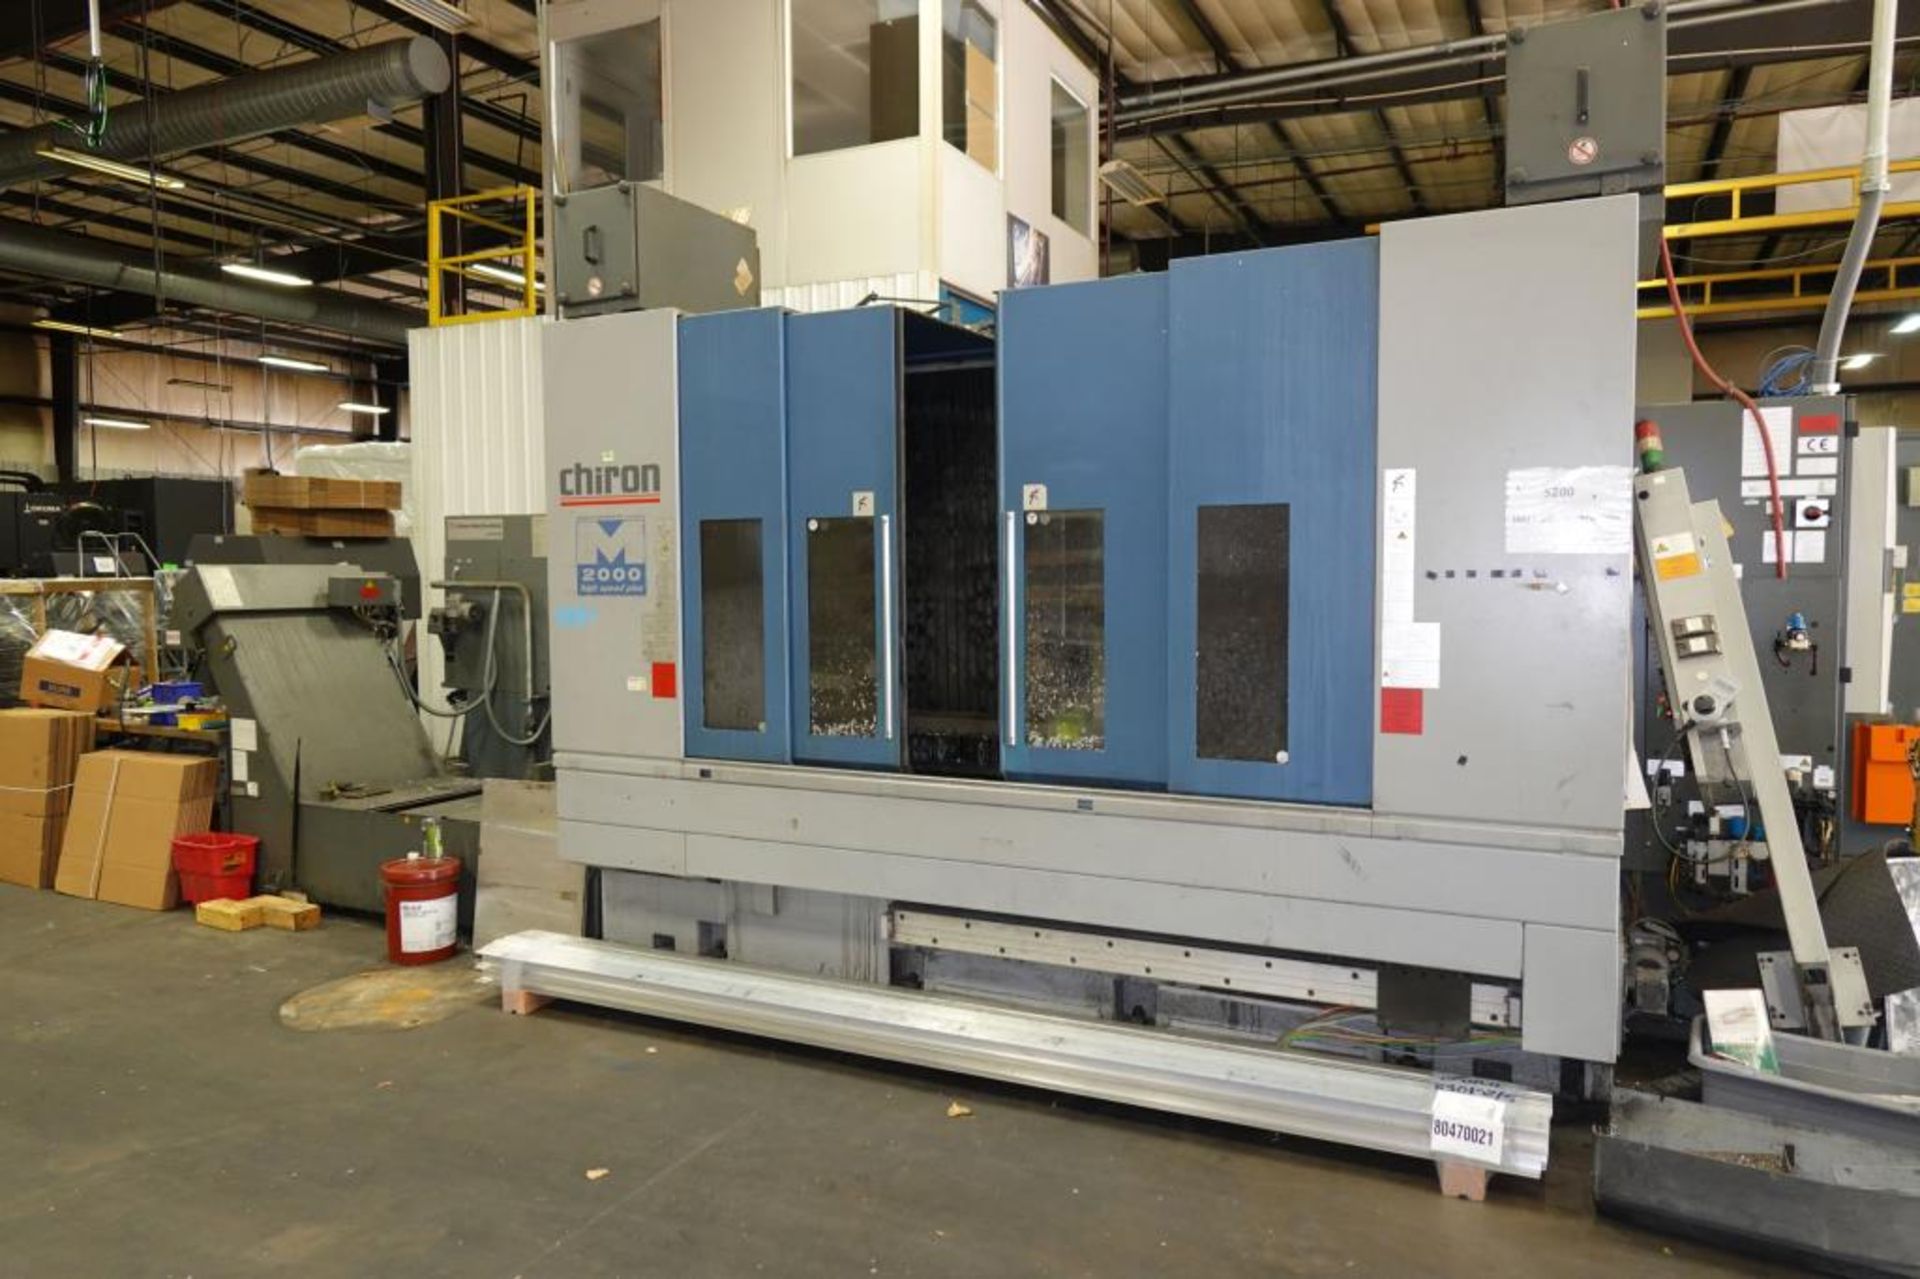 Chiron M2000 High Speed Plus High Speed Machining Centre (Inoperable) - Image 24 of 24